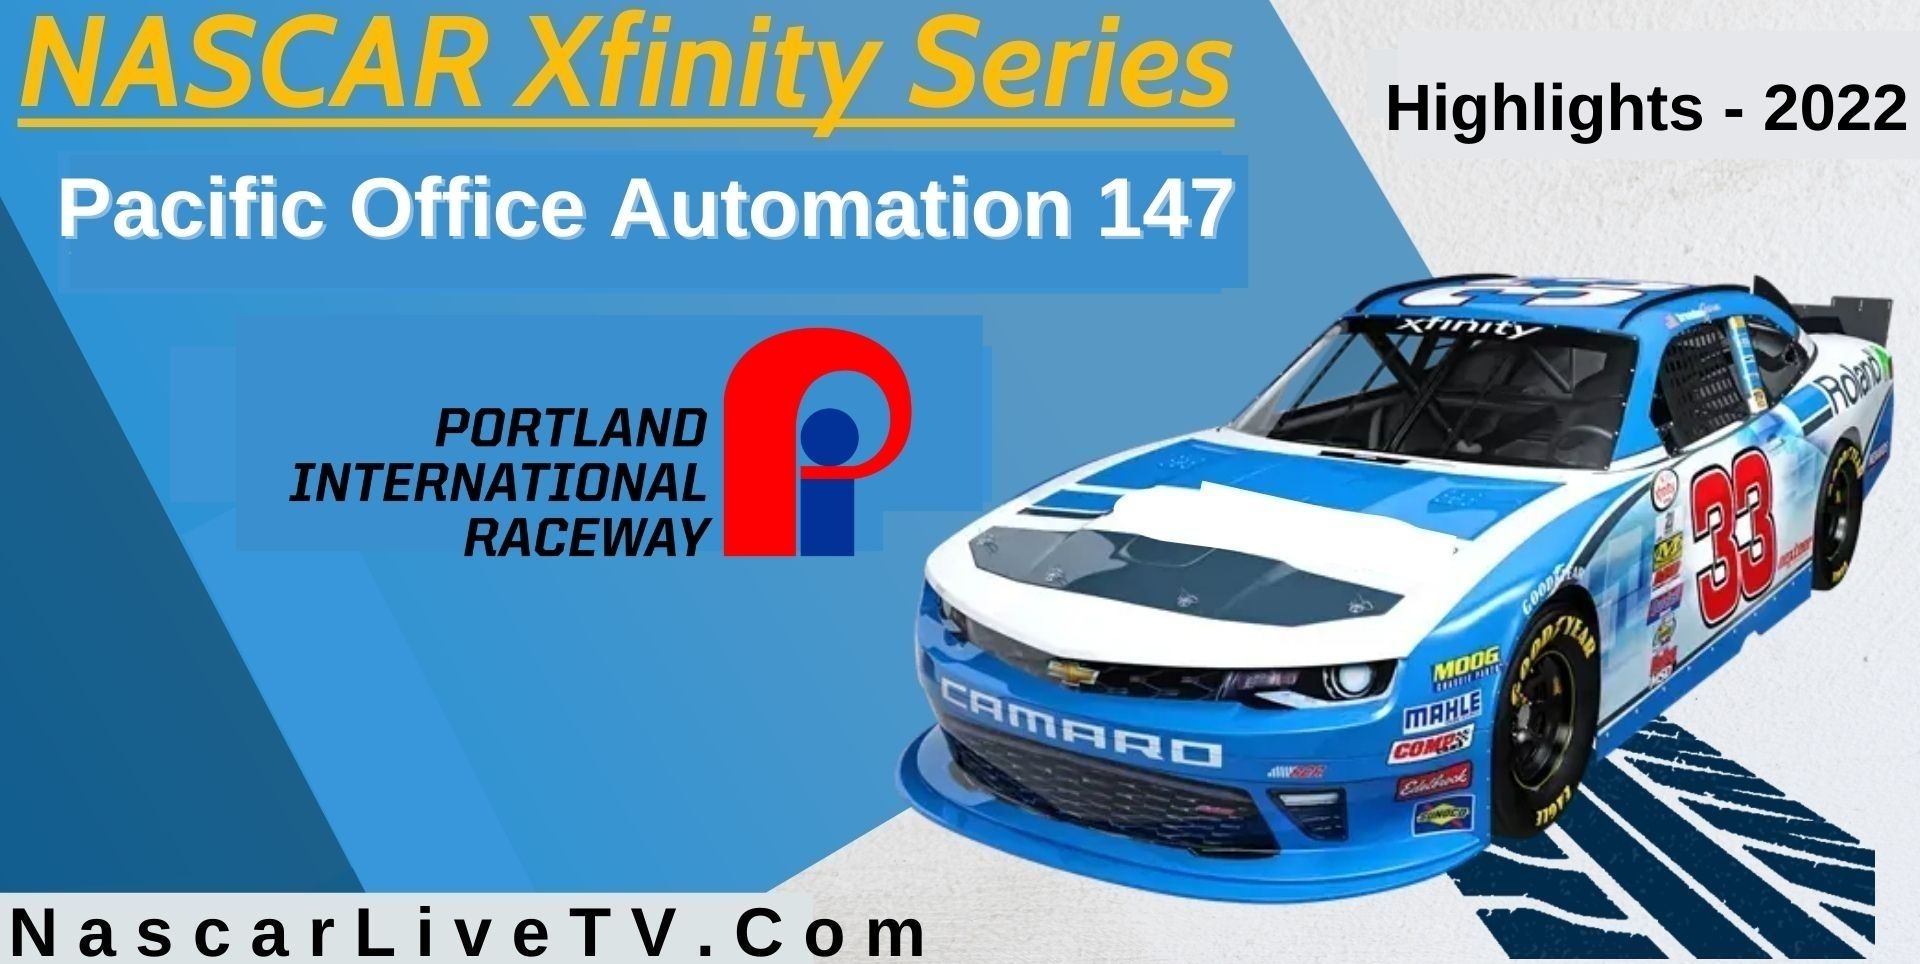 Pacific Office Automation 147 Highlights NASCAR Xfinity 2022